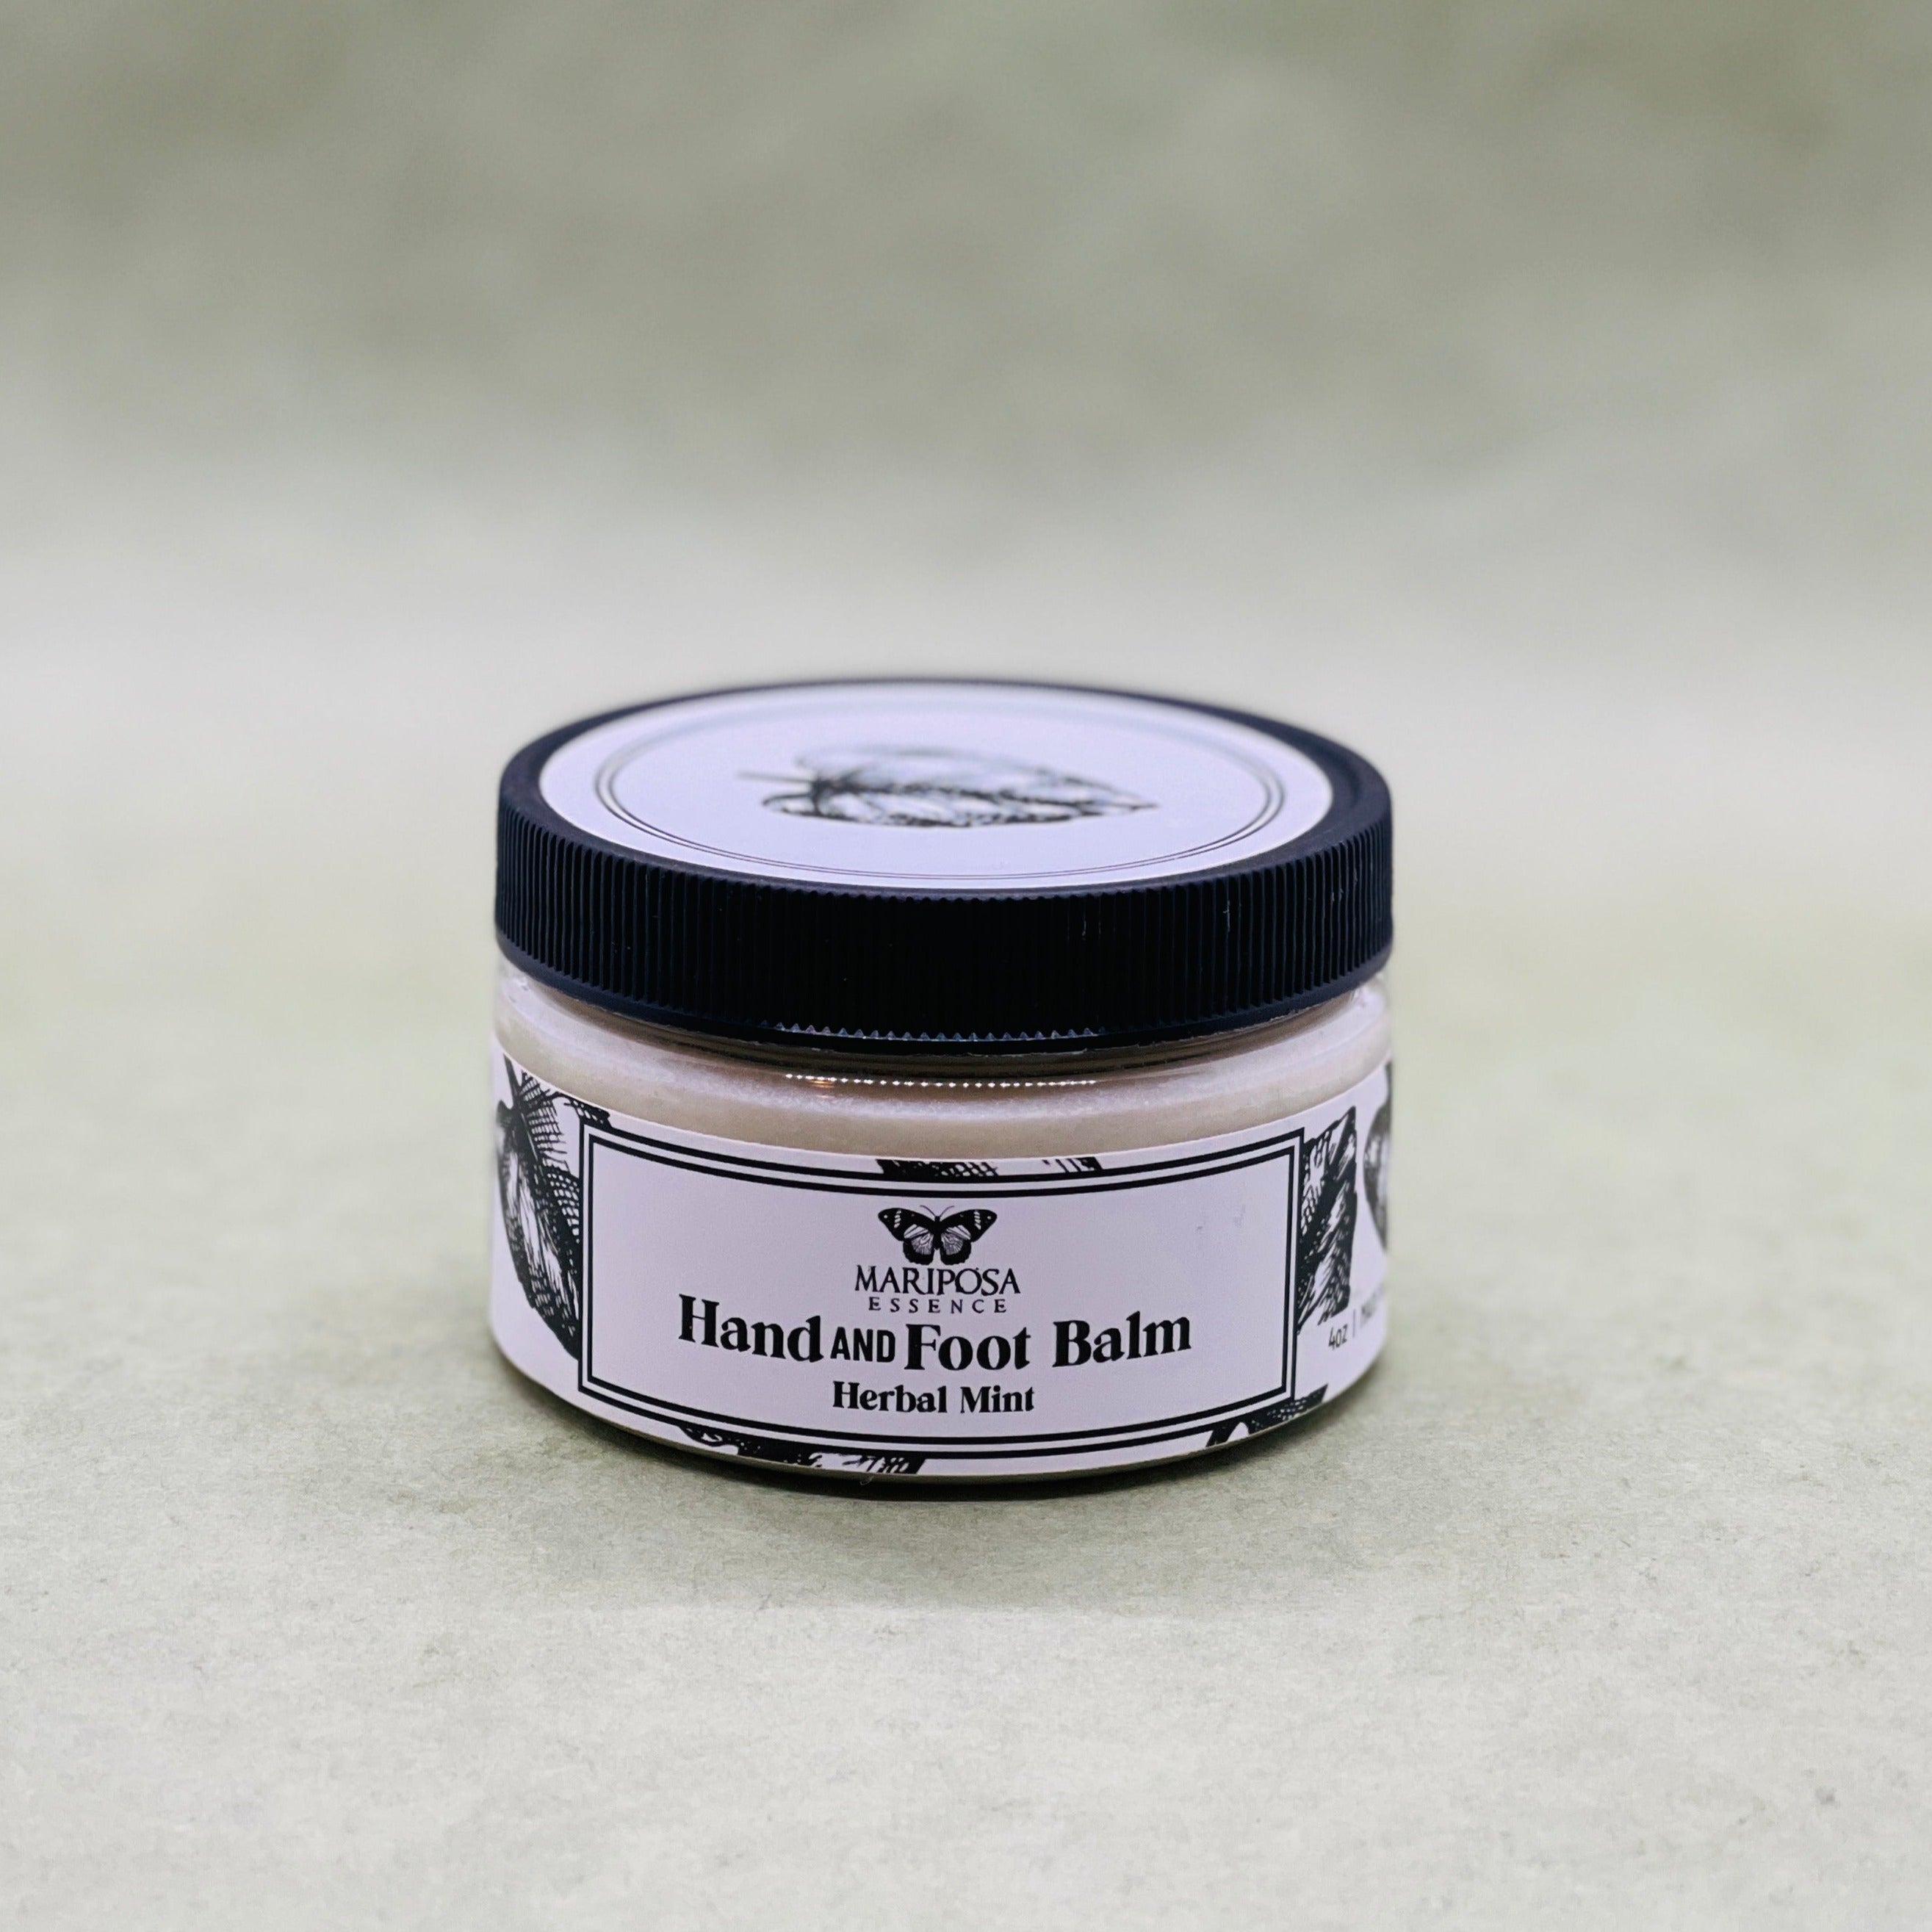 Herbal Mint Hand and Foot Balm